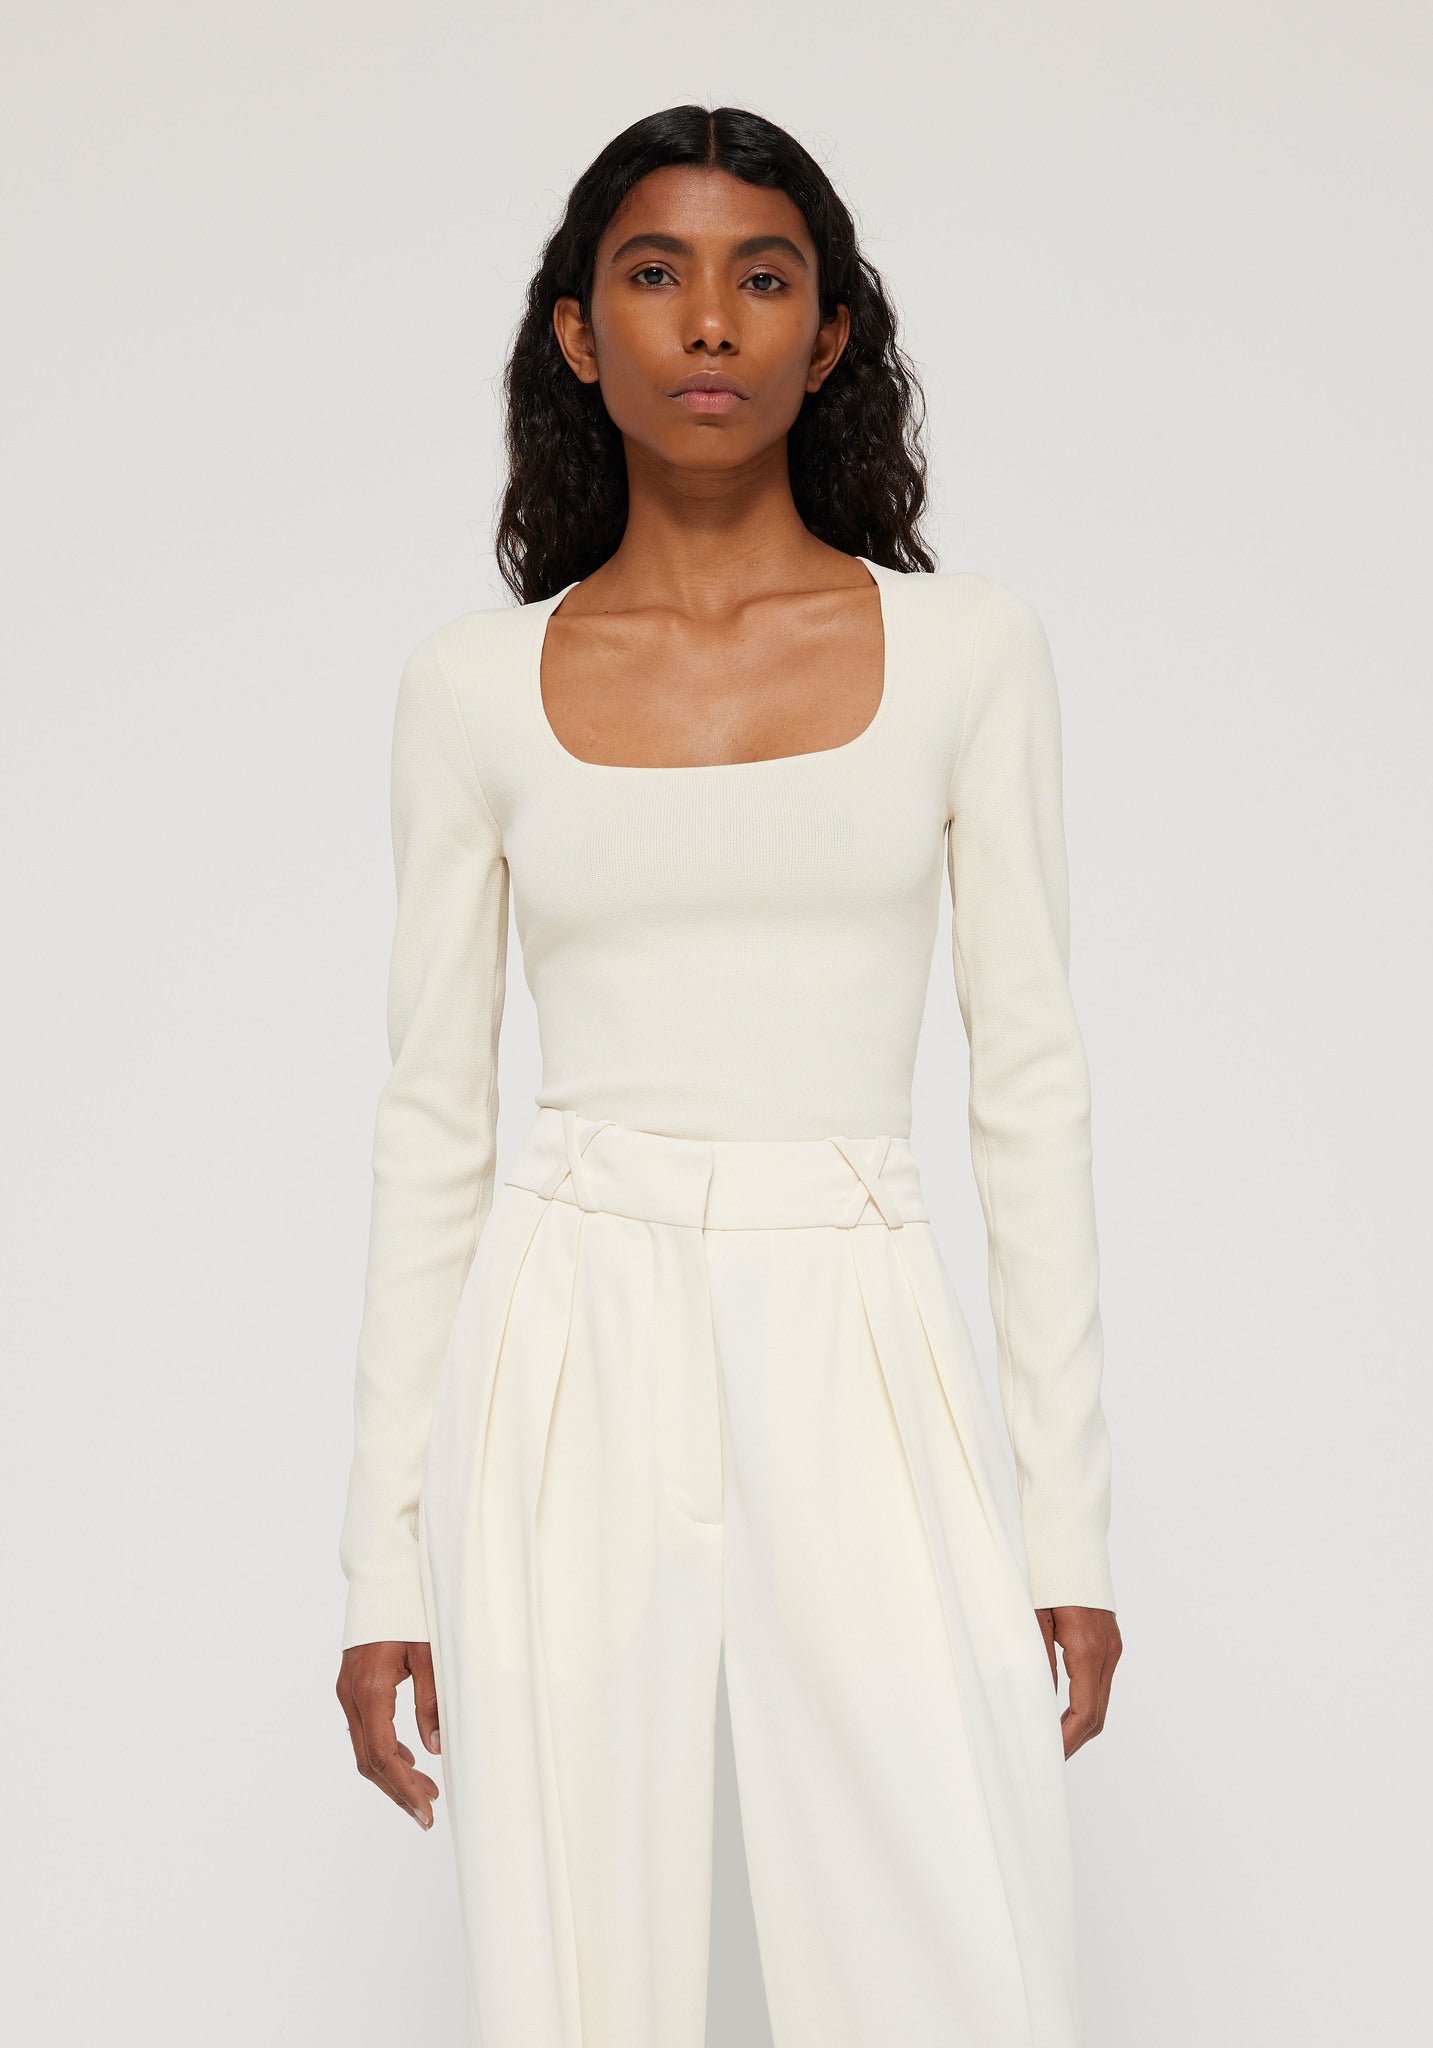 Rohe Bustier Shaped Knitted Top in Off-White available at TNT The New Trend Australia.